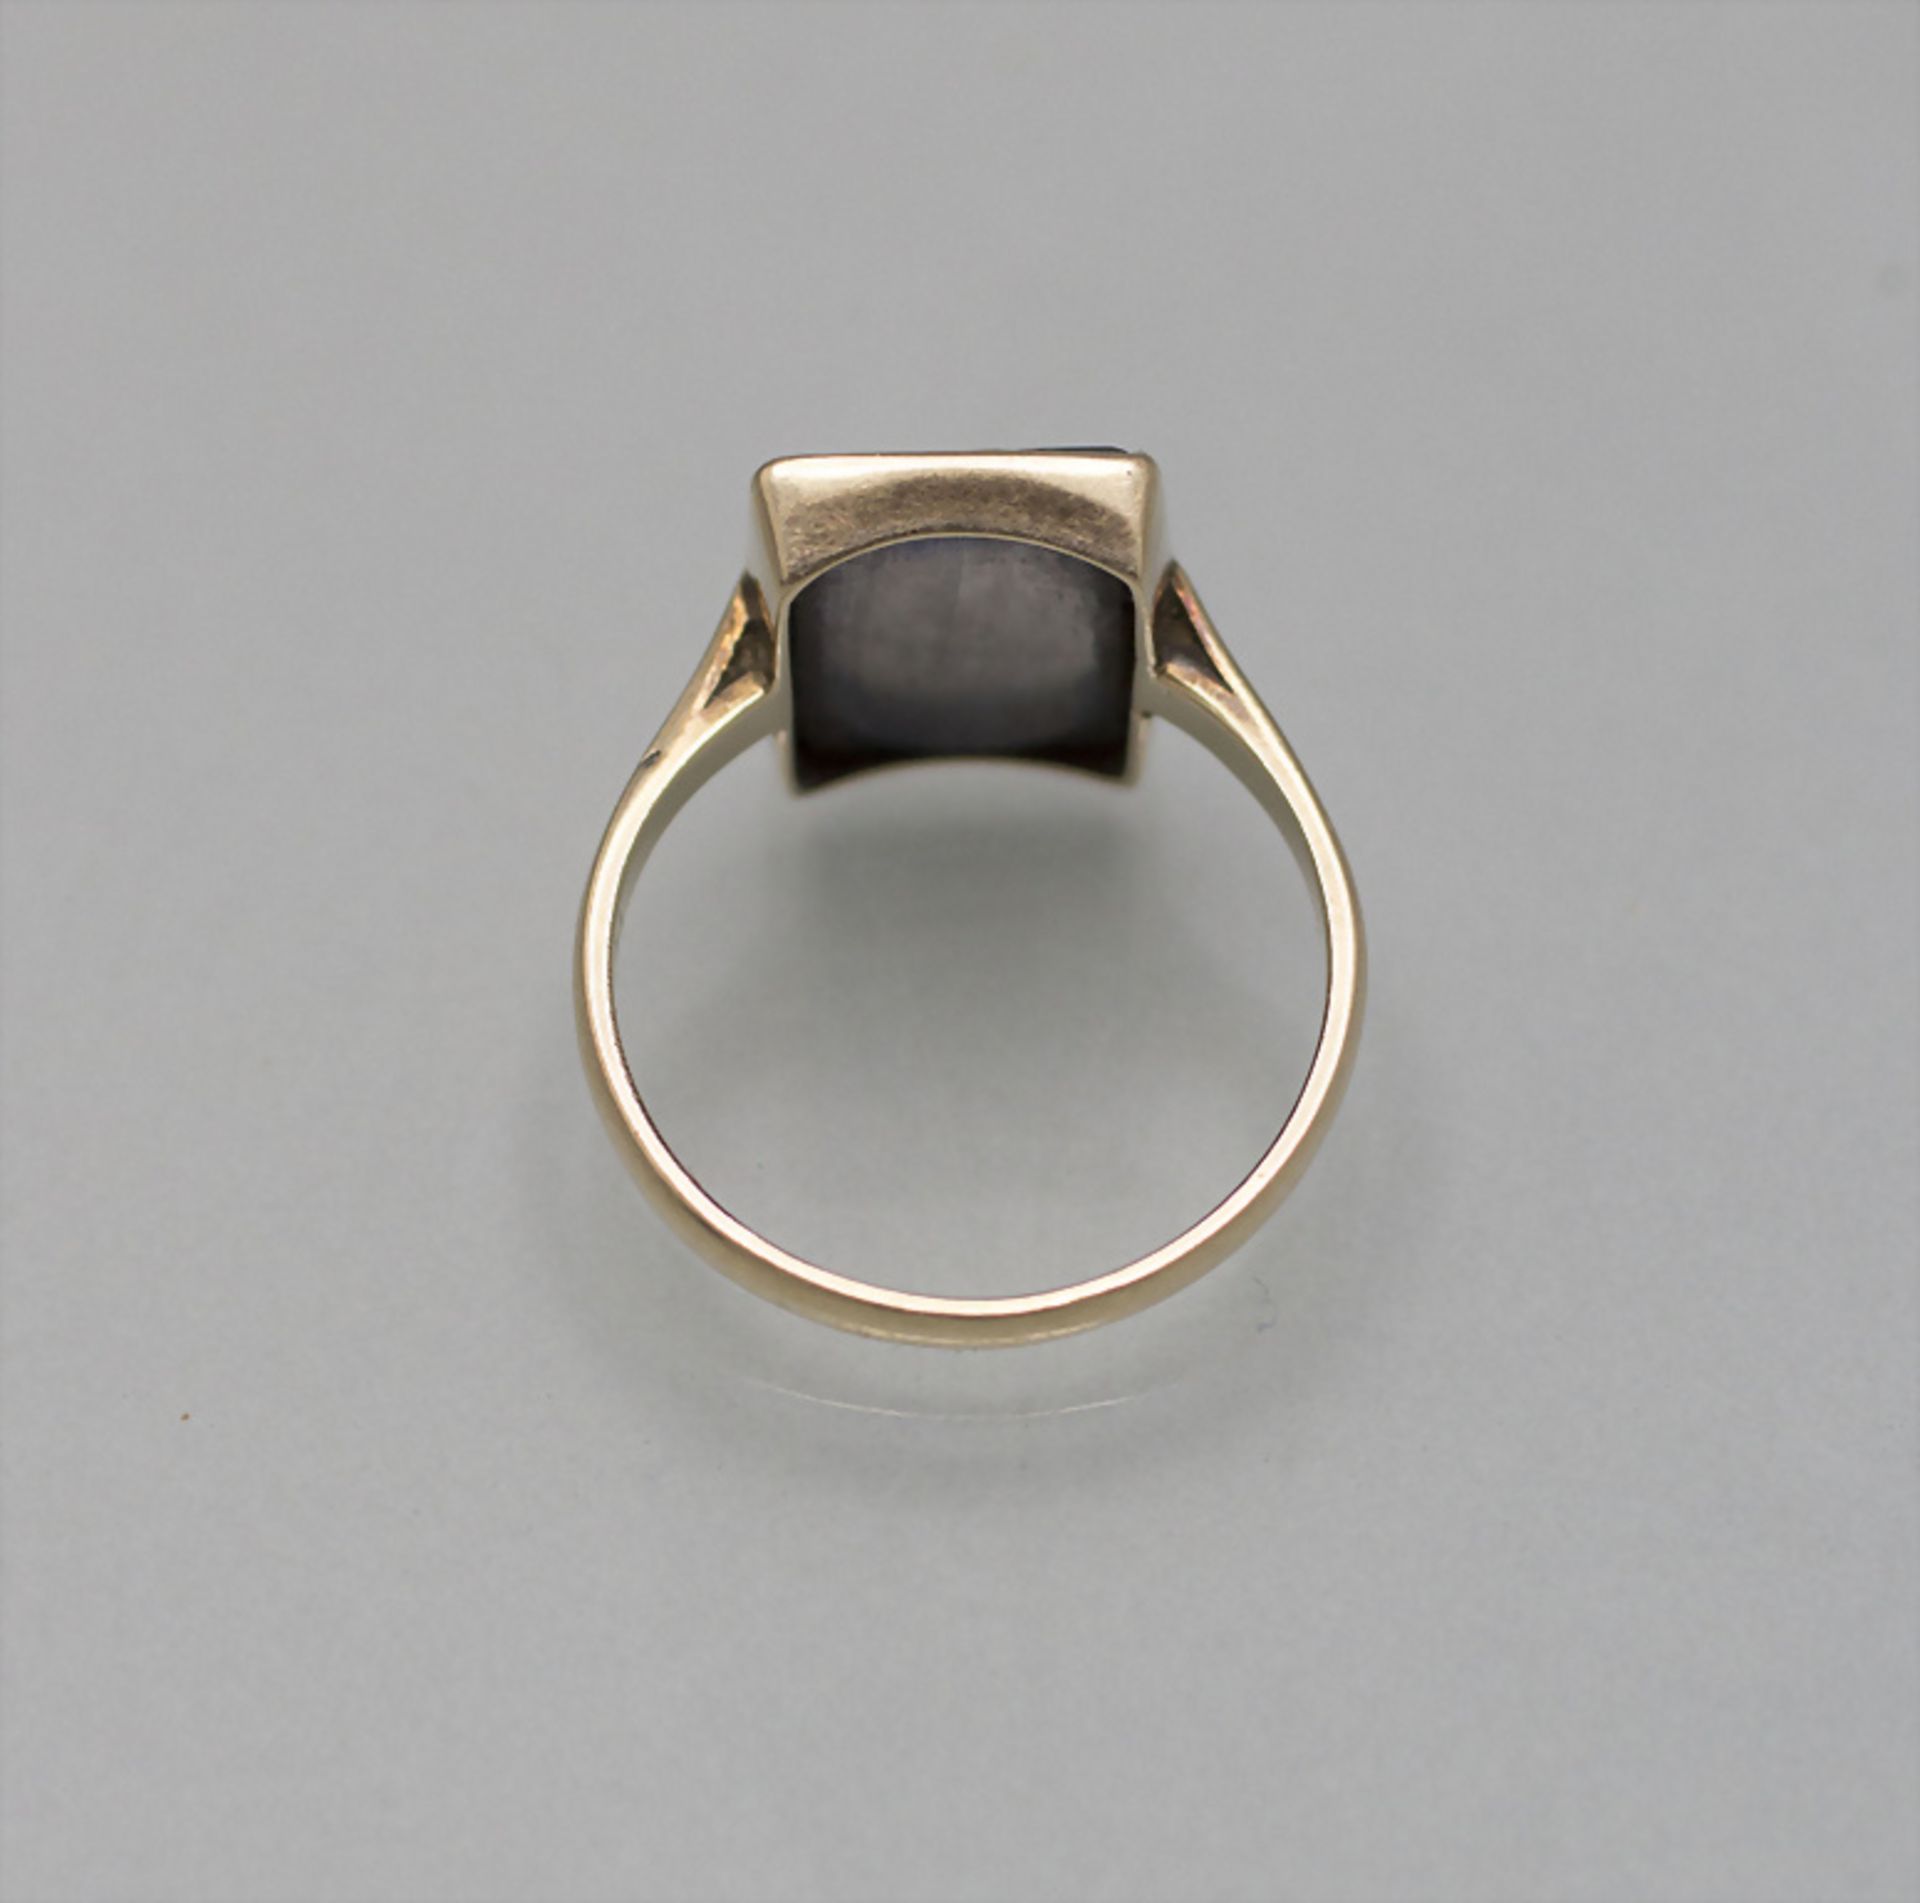 Damenring mit Gemme / A ladies 14 ct gold ring with a gem, um 1900 - Image 2 of 2